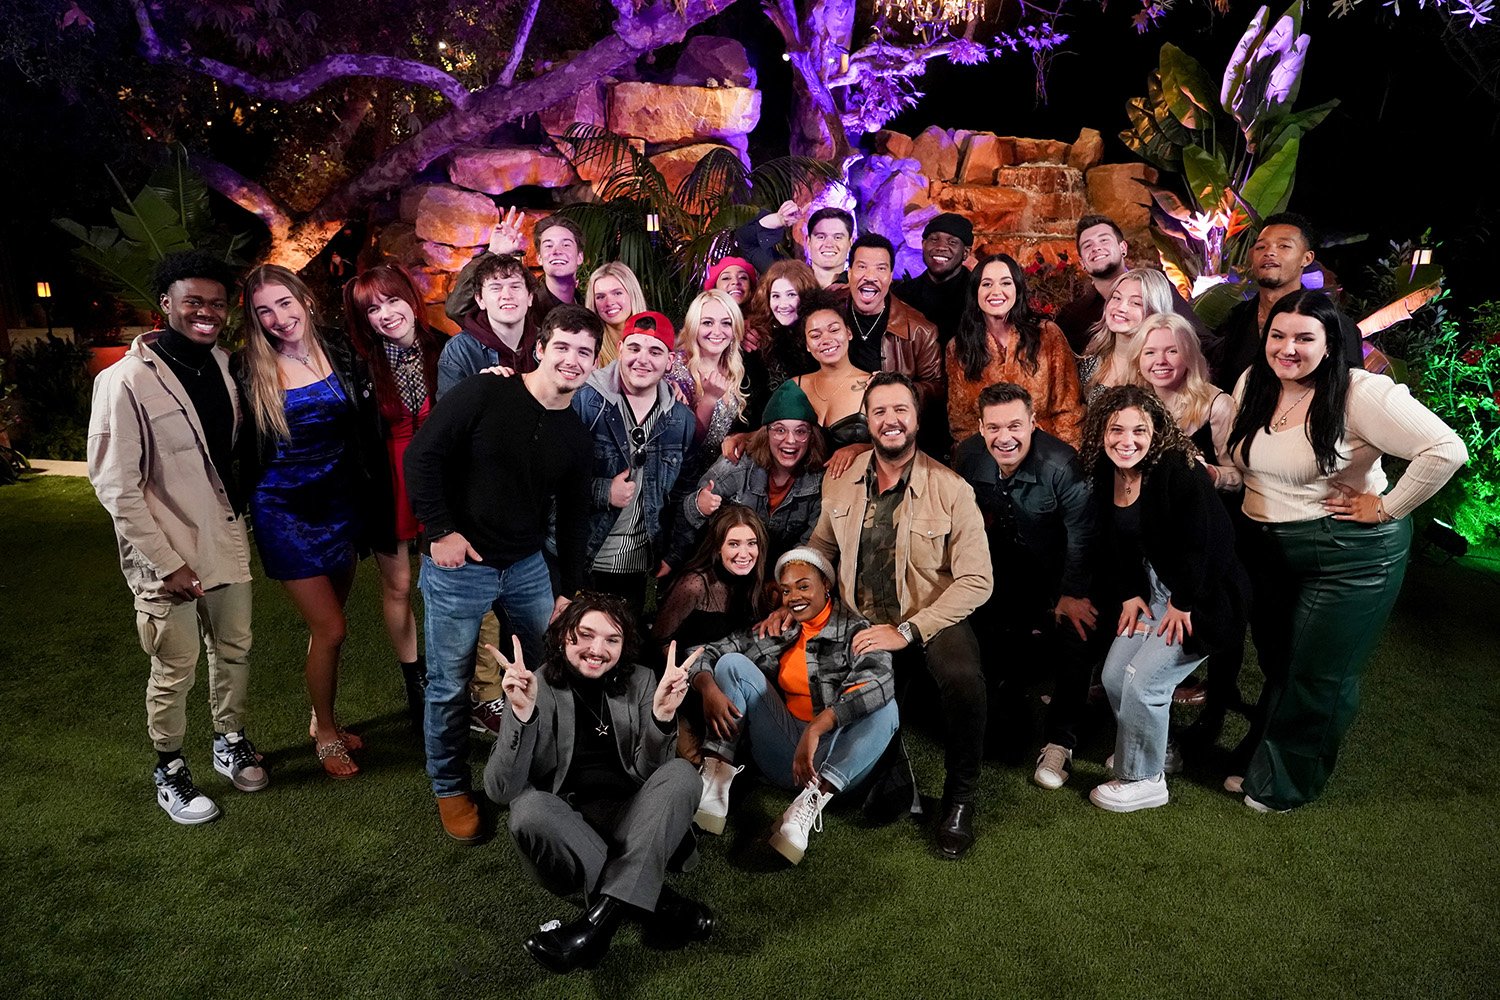 American Idol 2022 Top 24 contestants pose with Lionel Richie, Luke Bryan, Katy Perry, and Ryan Seacrest